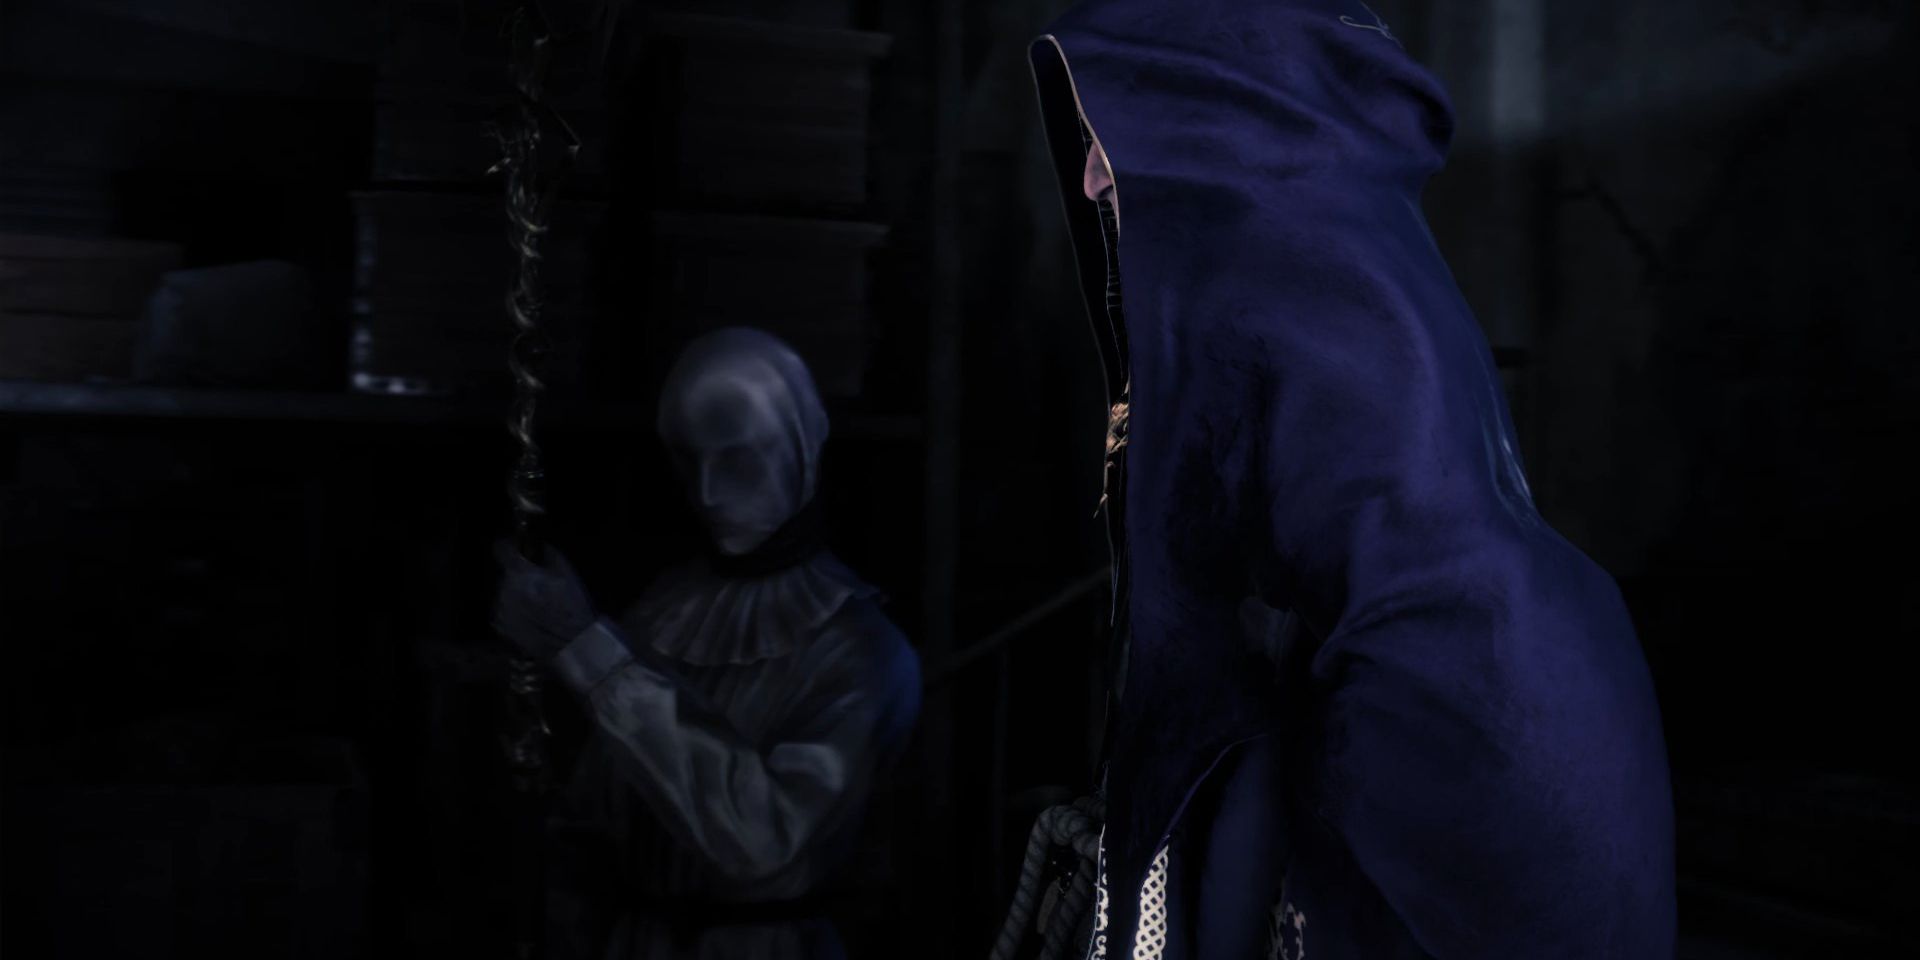 In footage from Resident Evil 4 Remake, a dark-robed Zealot stands in the foreground with what appears to be a cloth-hooded female Zealot behind